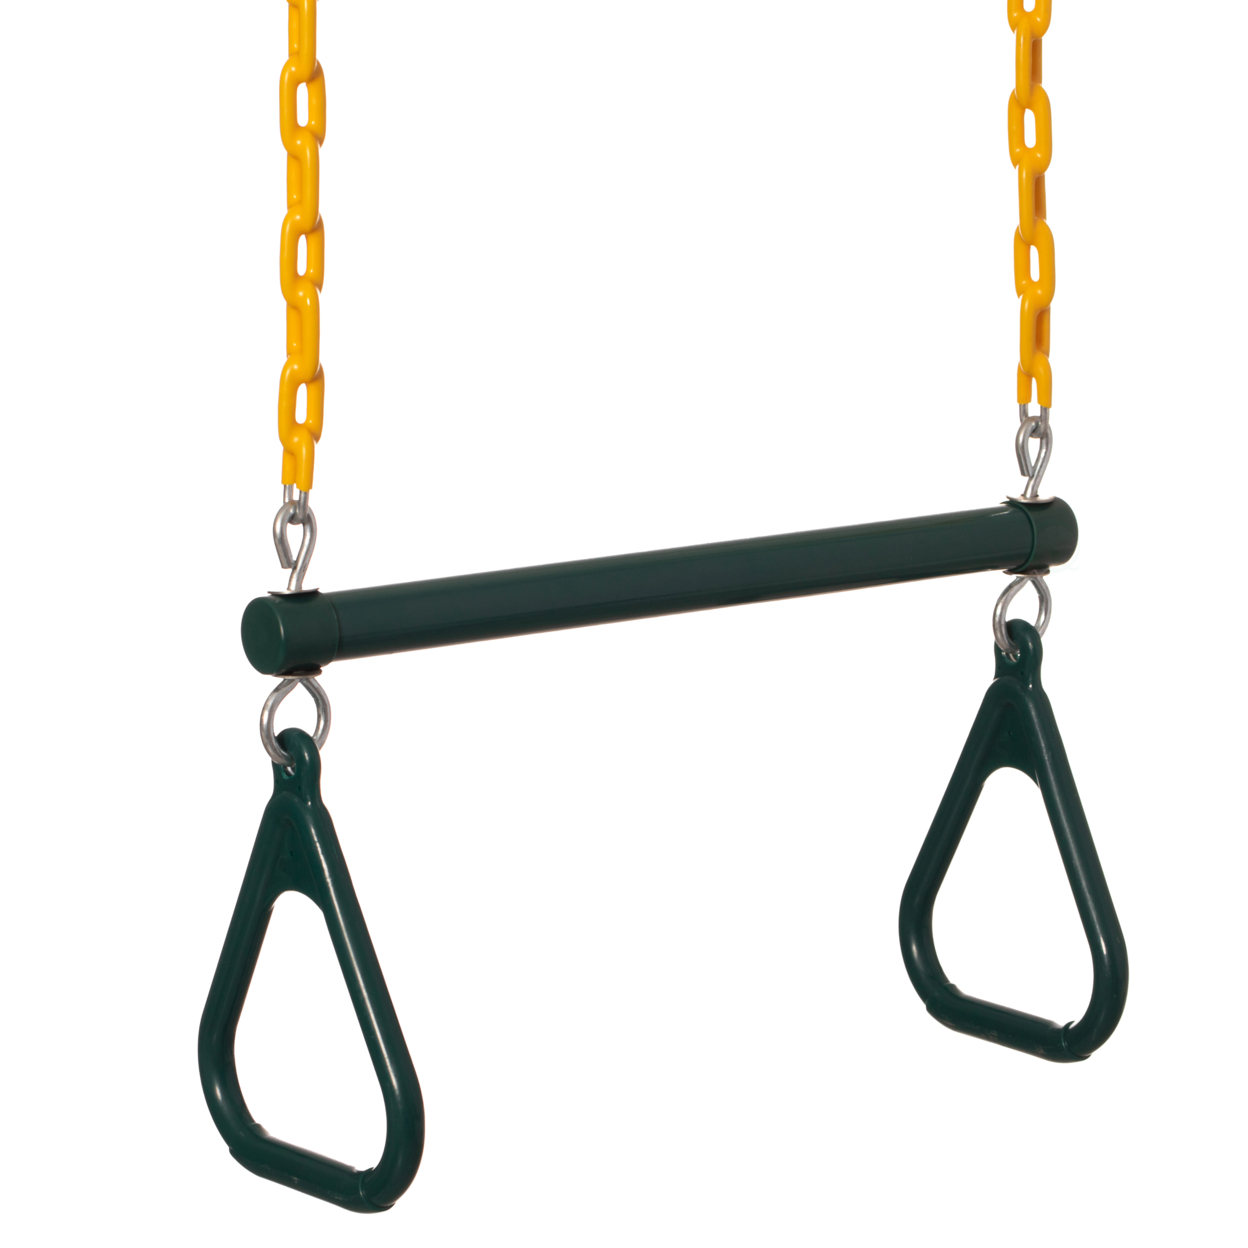 Outdoor Playground Gym Heavy Duty Kids Fun Hanging Trapeze Bar, Green Steel Bar And Yellow Chain Swing Playsets